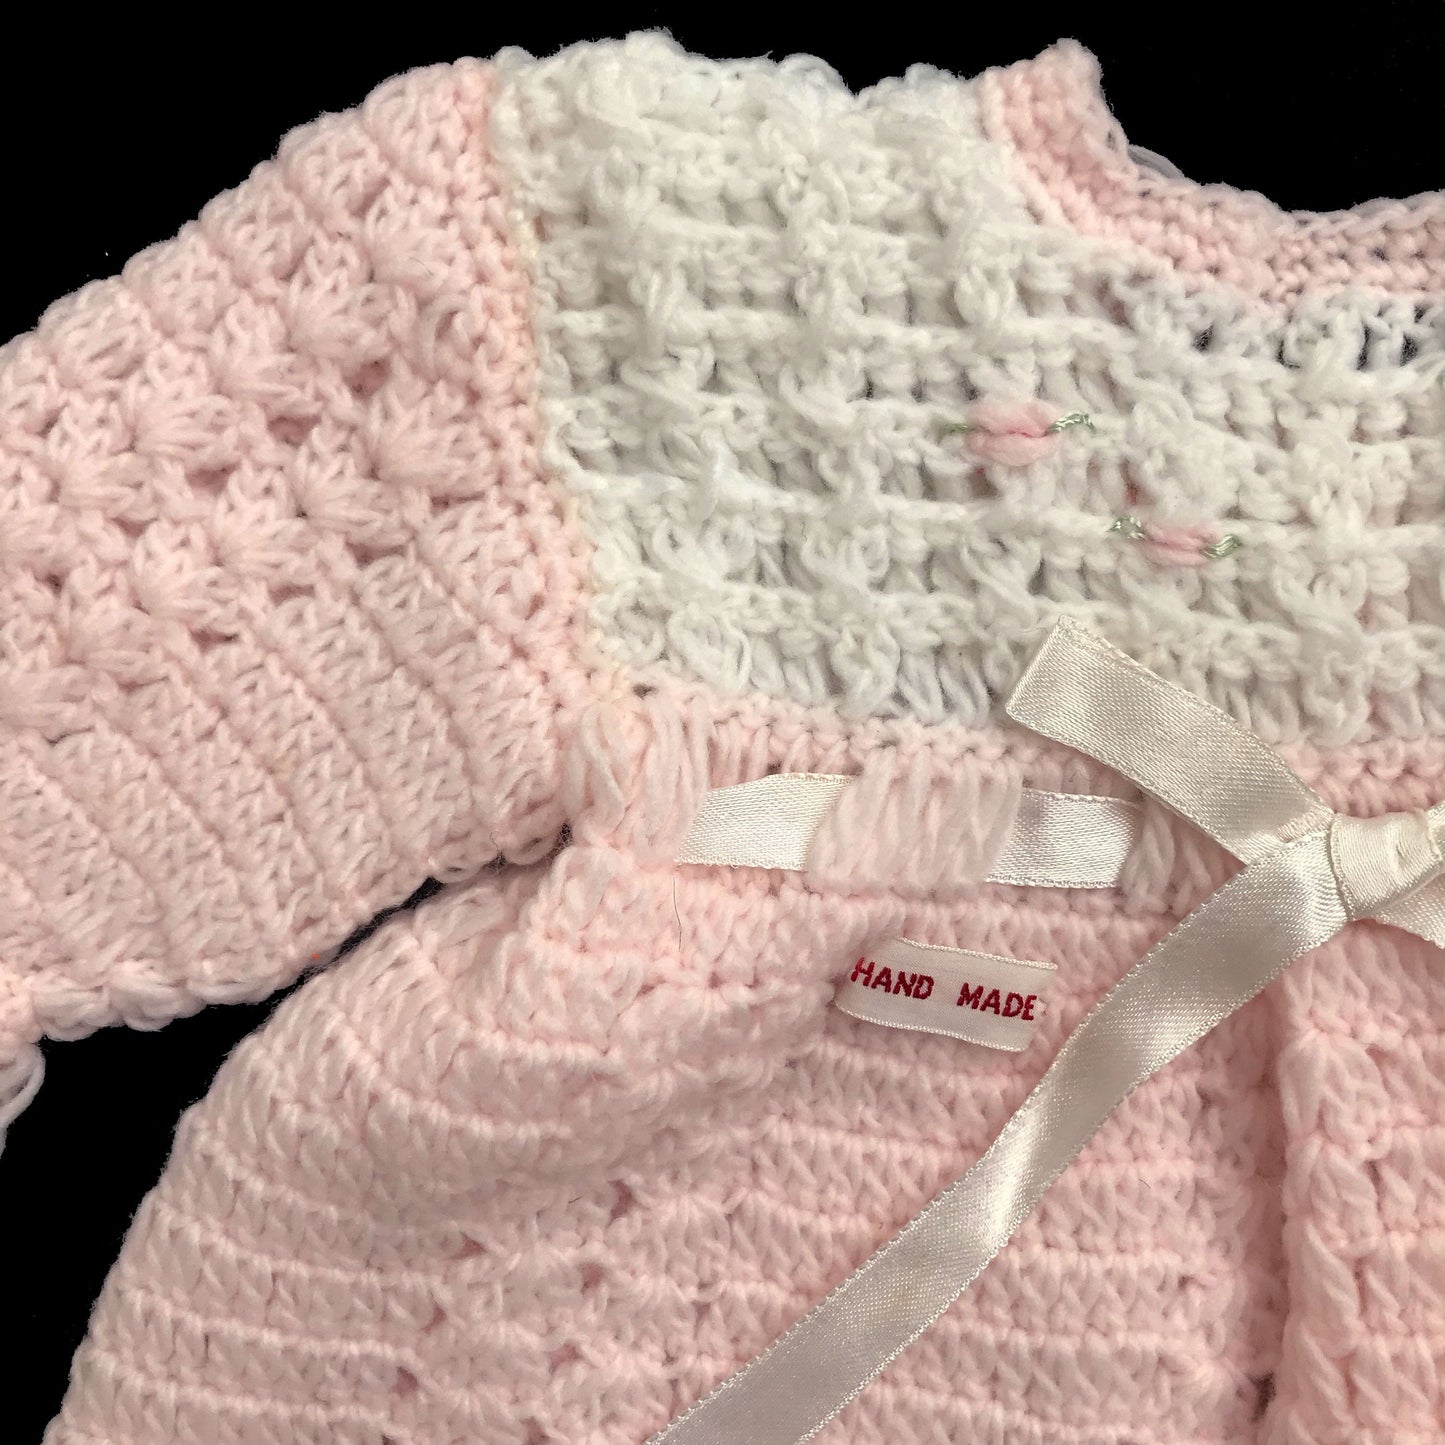 Vintage 70s Pink/ White Knitted  Dress New Old Stock 6-9 Months